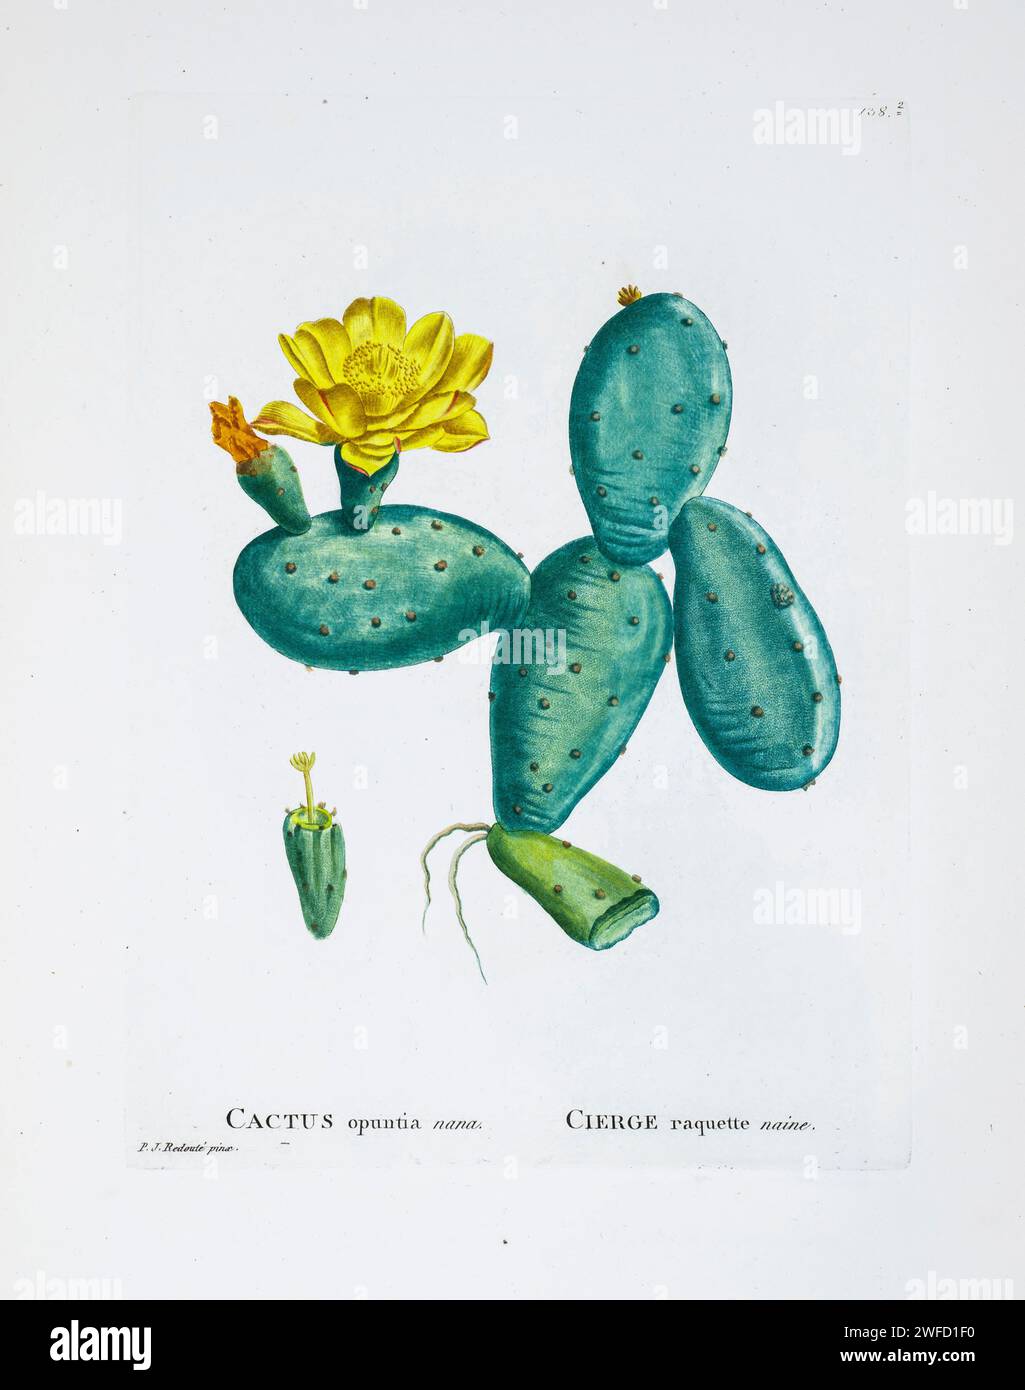 Opuntia humifusa here as Cactus opuntia nana from History of Succulent Plants [Plantarum historia succulentarum / Histoire des plantes grasses] painted by Pierre-Joseph Redouté and described by Augustin Pyramus de Candolle 1799 Opuntia, commonly called the prickly pear cactus, is a genus of flowering plants in the cactus family Cactaceae, many known for their flavorful fruit and showy flowers. Prickly pear alone is more commonly used to refer exclusively to the fruit Stock Photo